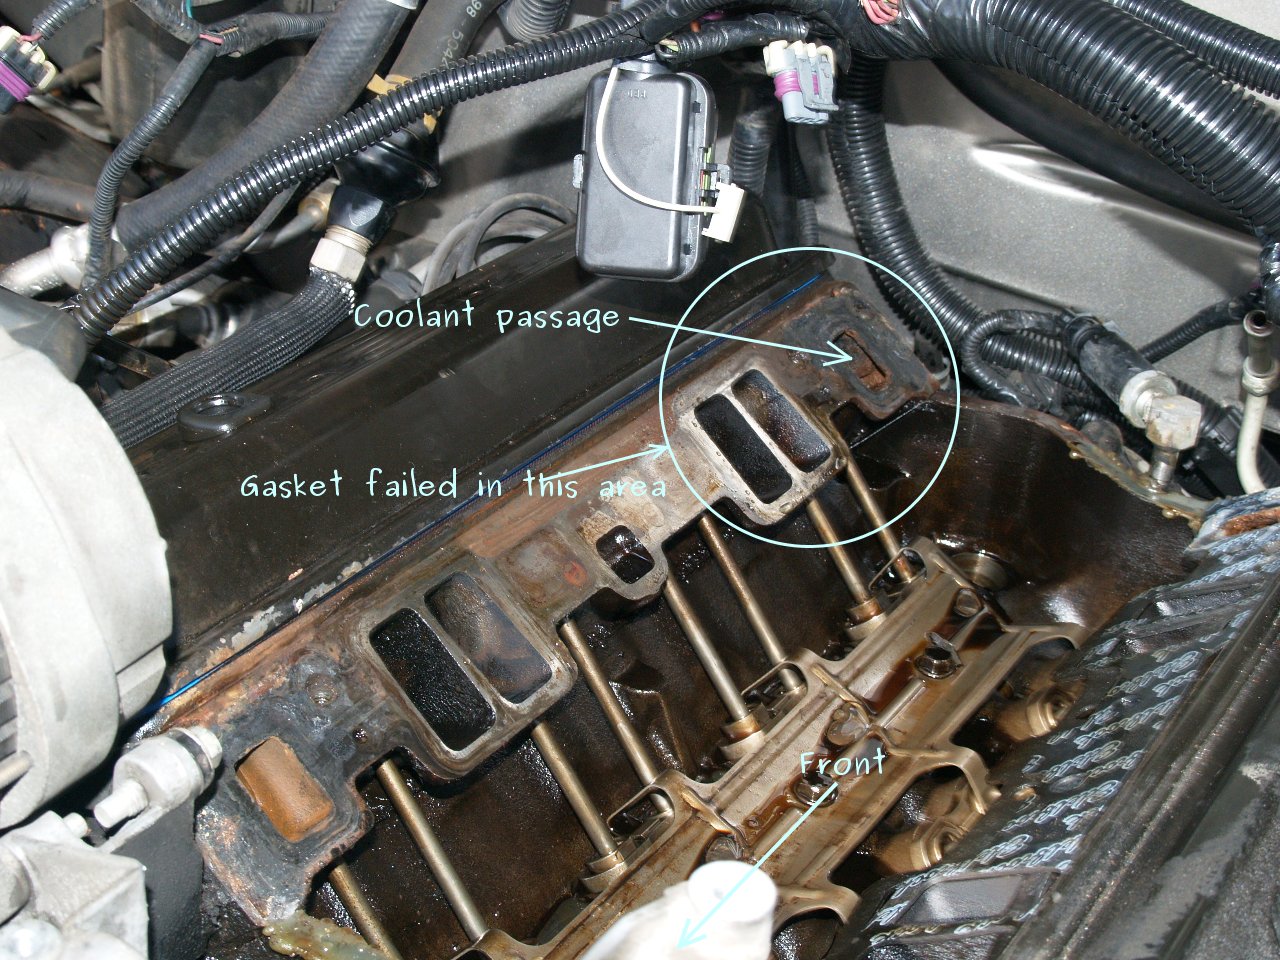 See C3850 in engine